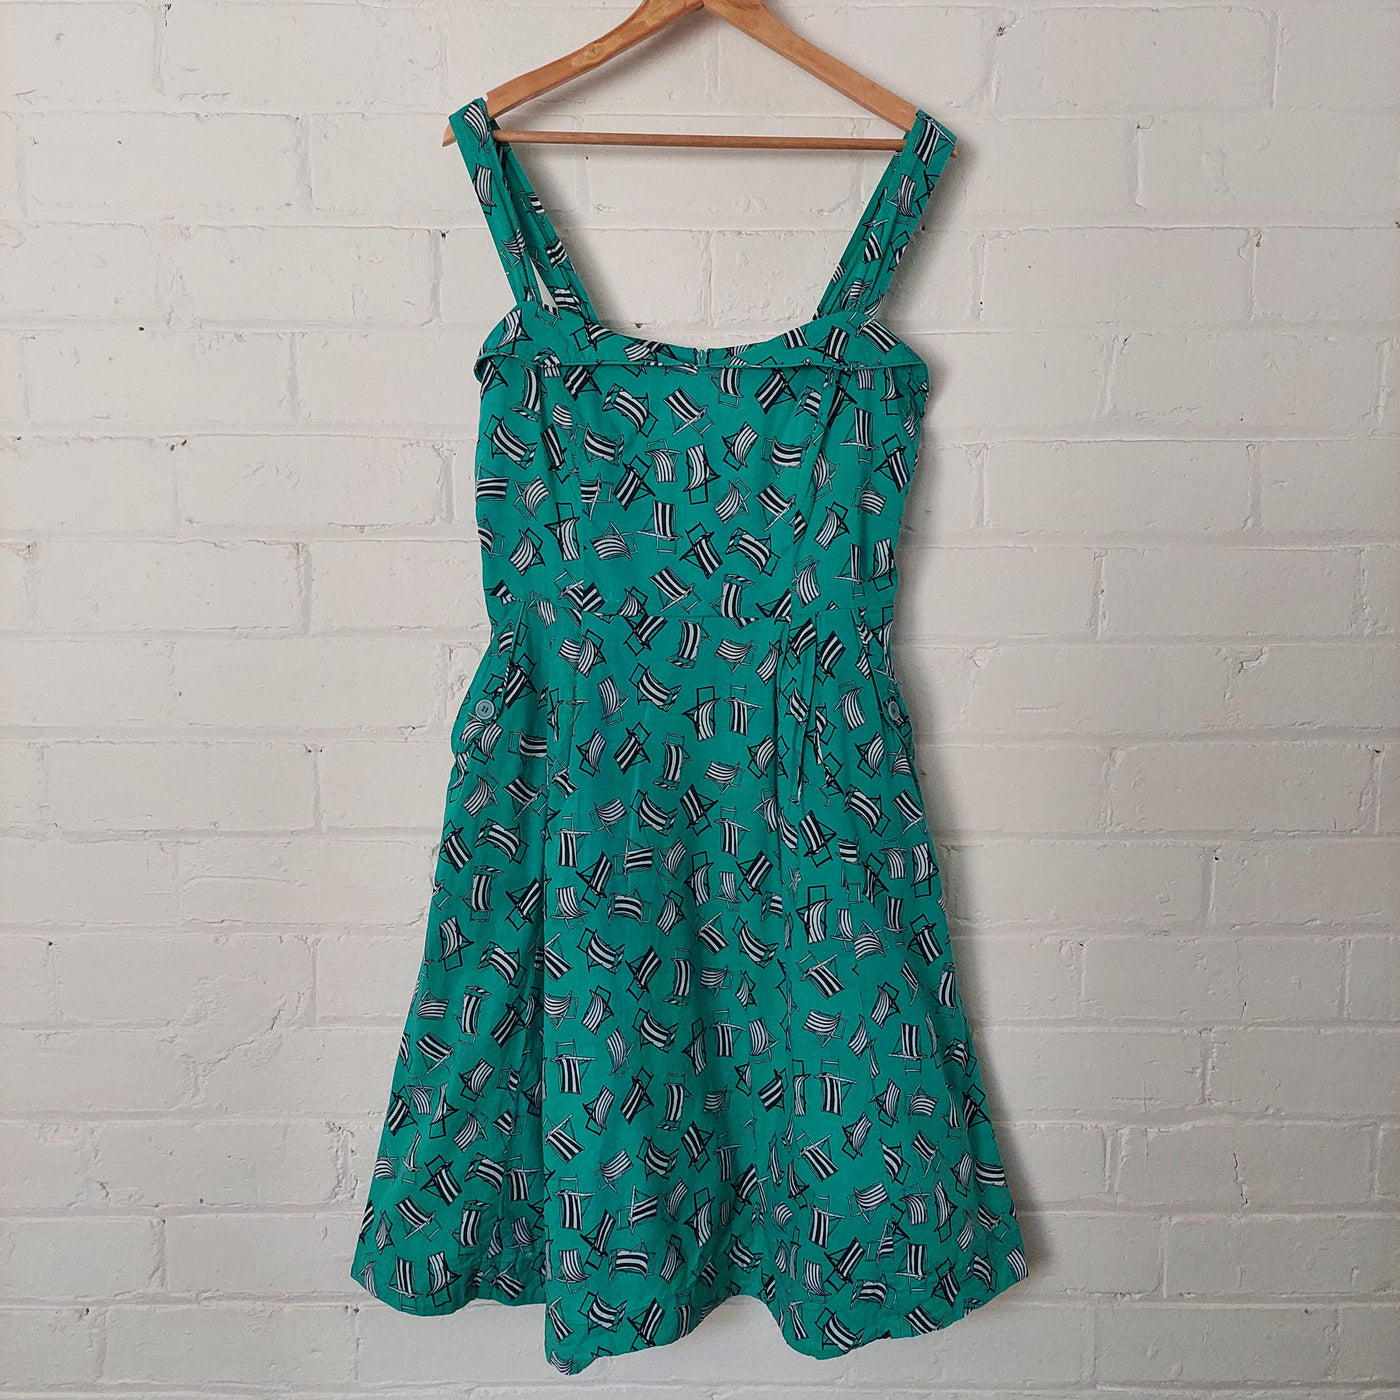 Emily and Fin deck chairs green midi dress, Size L (14)